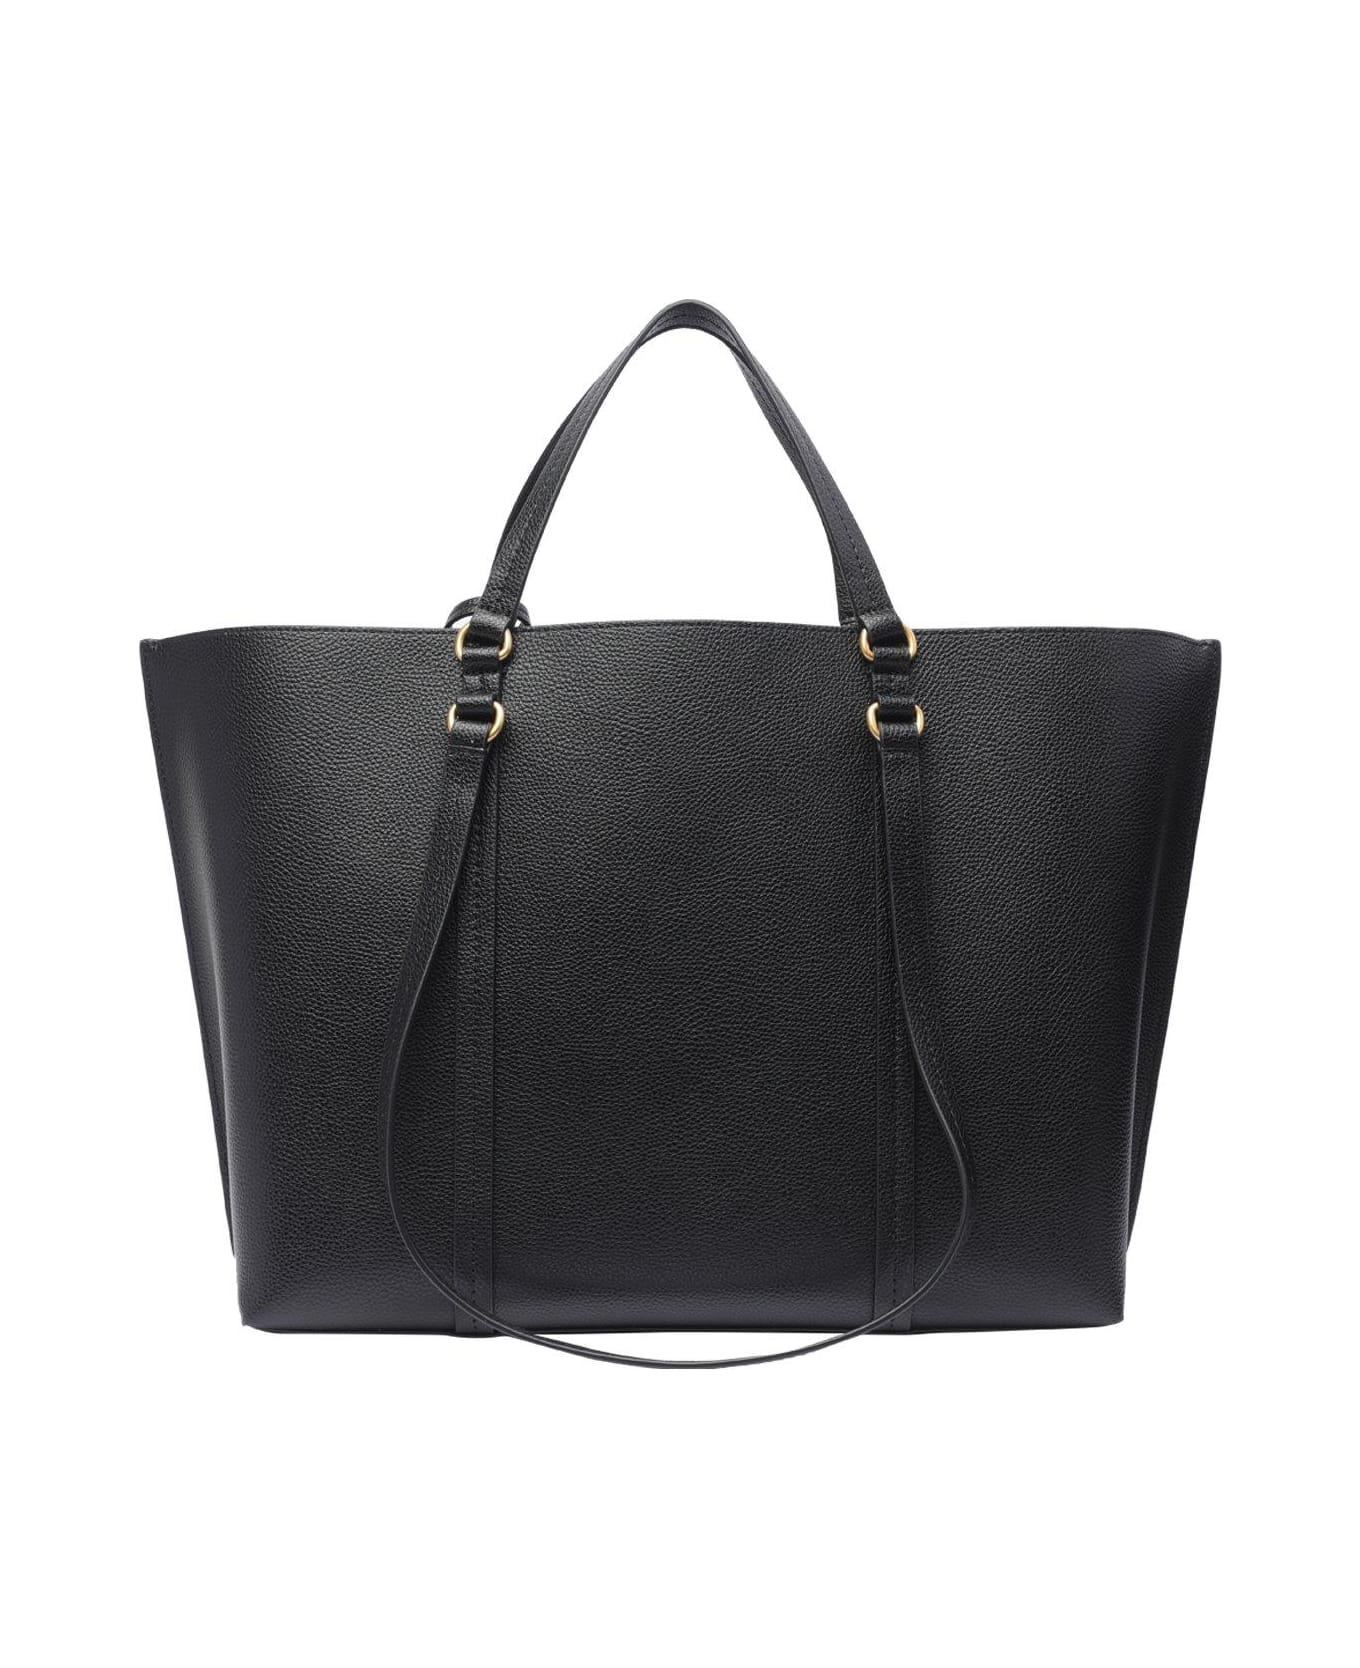 Pinko Carrie Large Tote Bag - Black トートバッグ